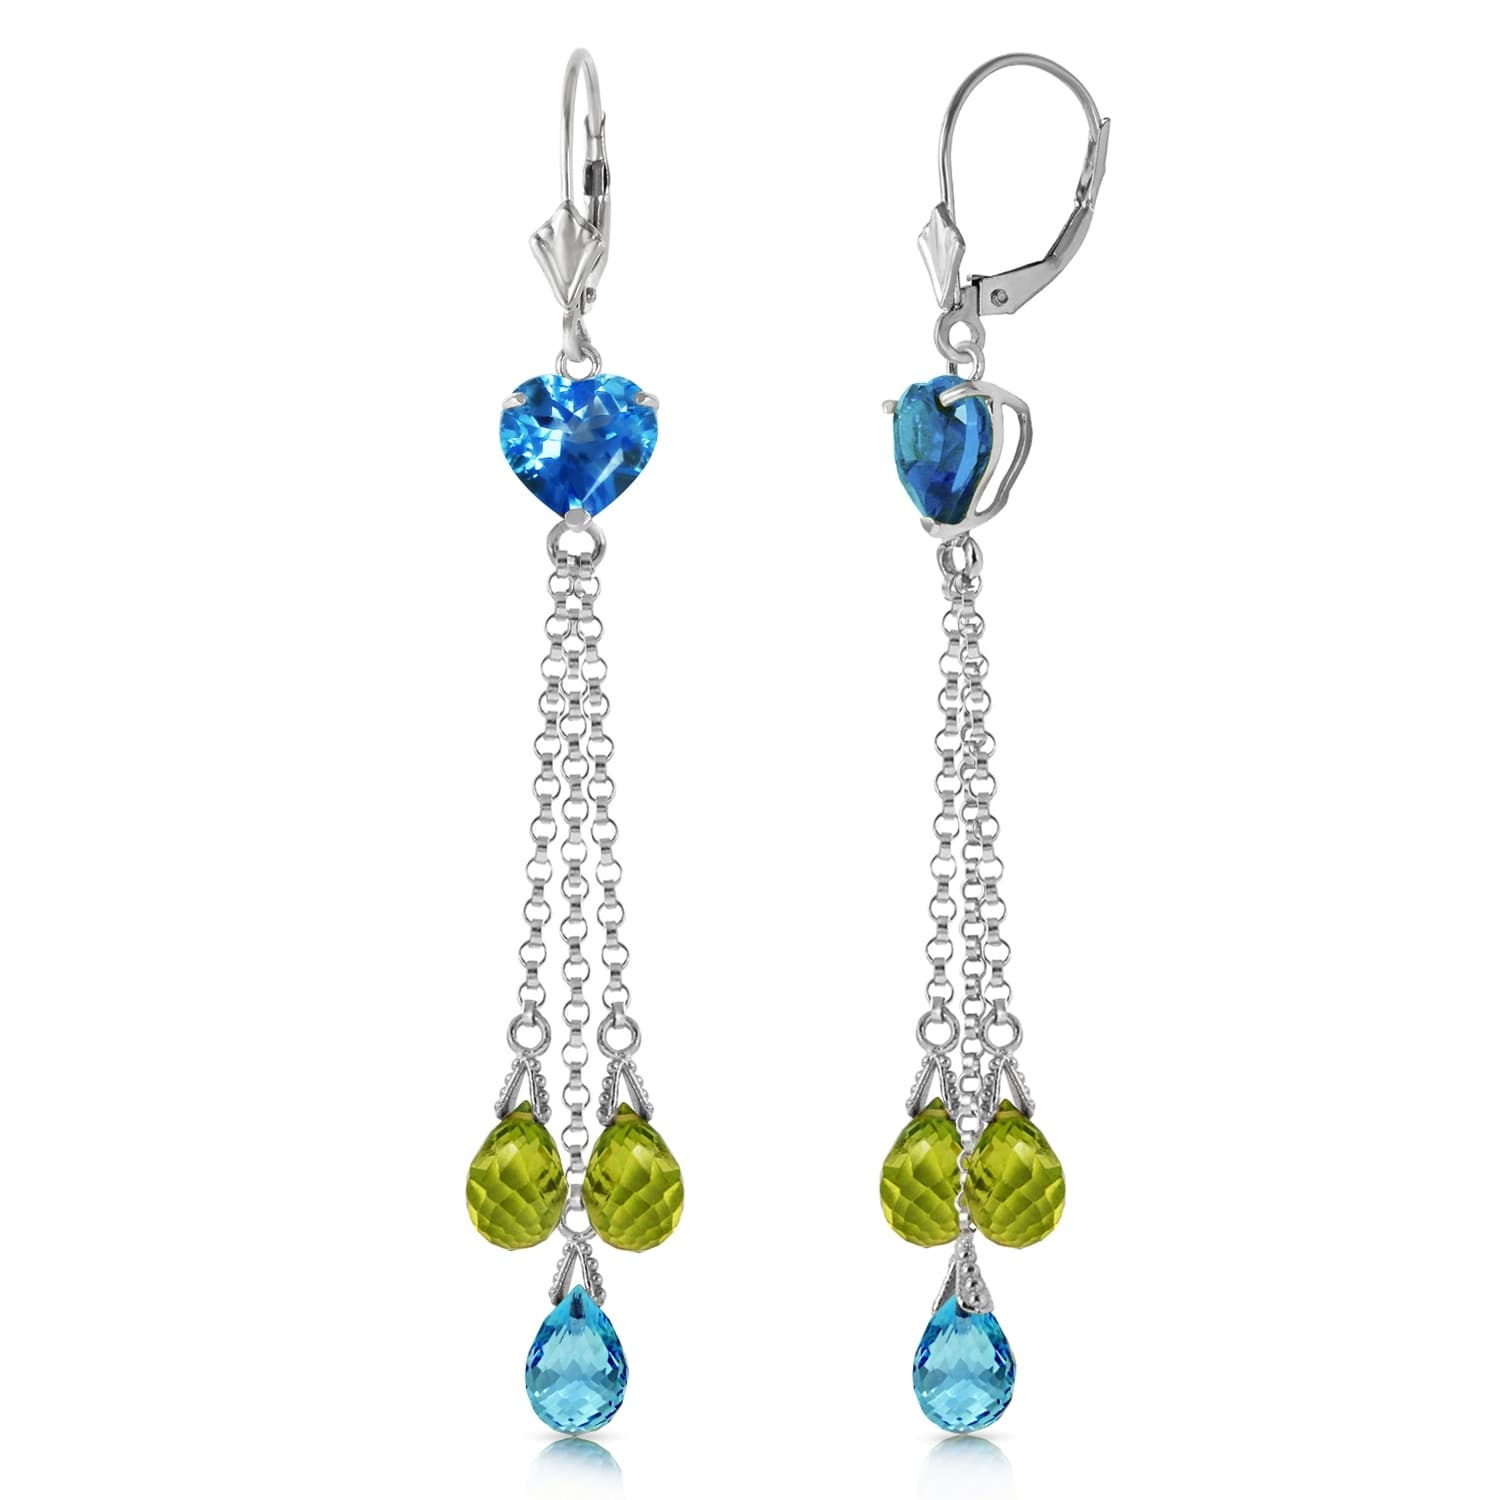 14K White Gold Chandelier Earrings With Colorful Semiprecious Gemstones